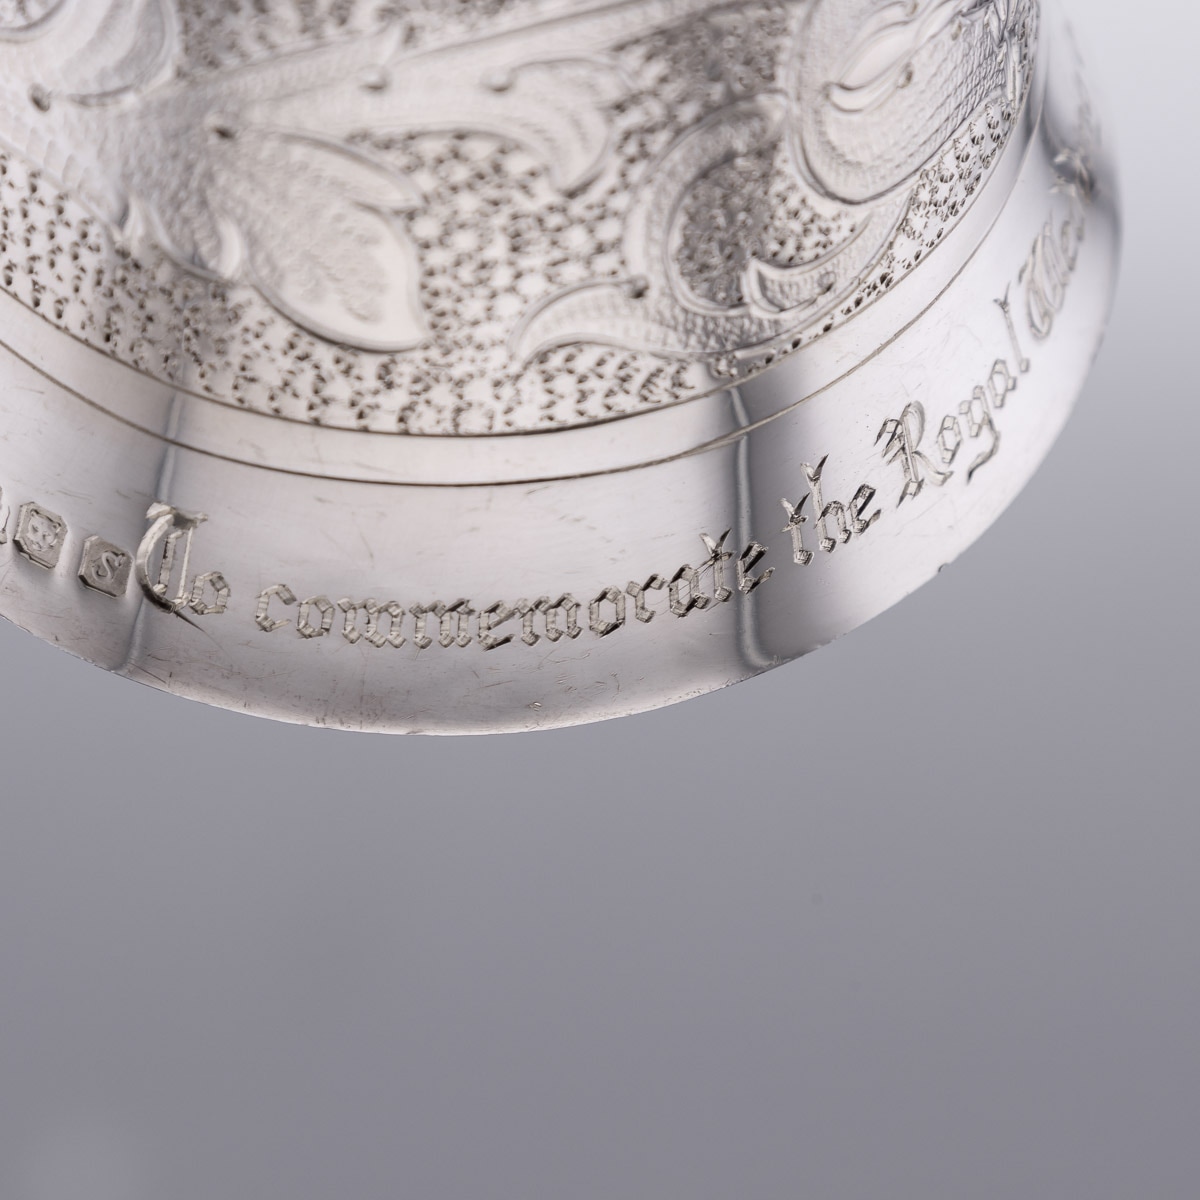 A ROYAL WEDDING SOLID STERLING SILVER NOVELTY WAGER CUP, LONDON, C. 1973 - Image 13 of 23